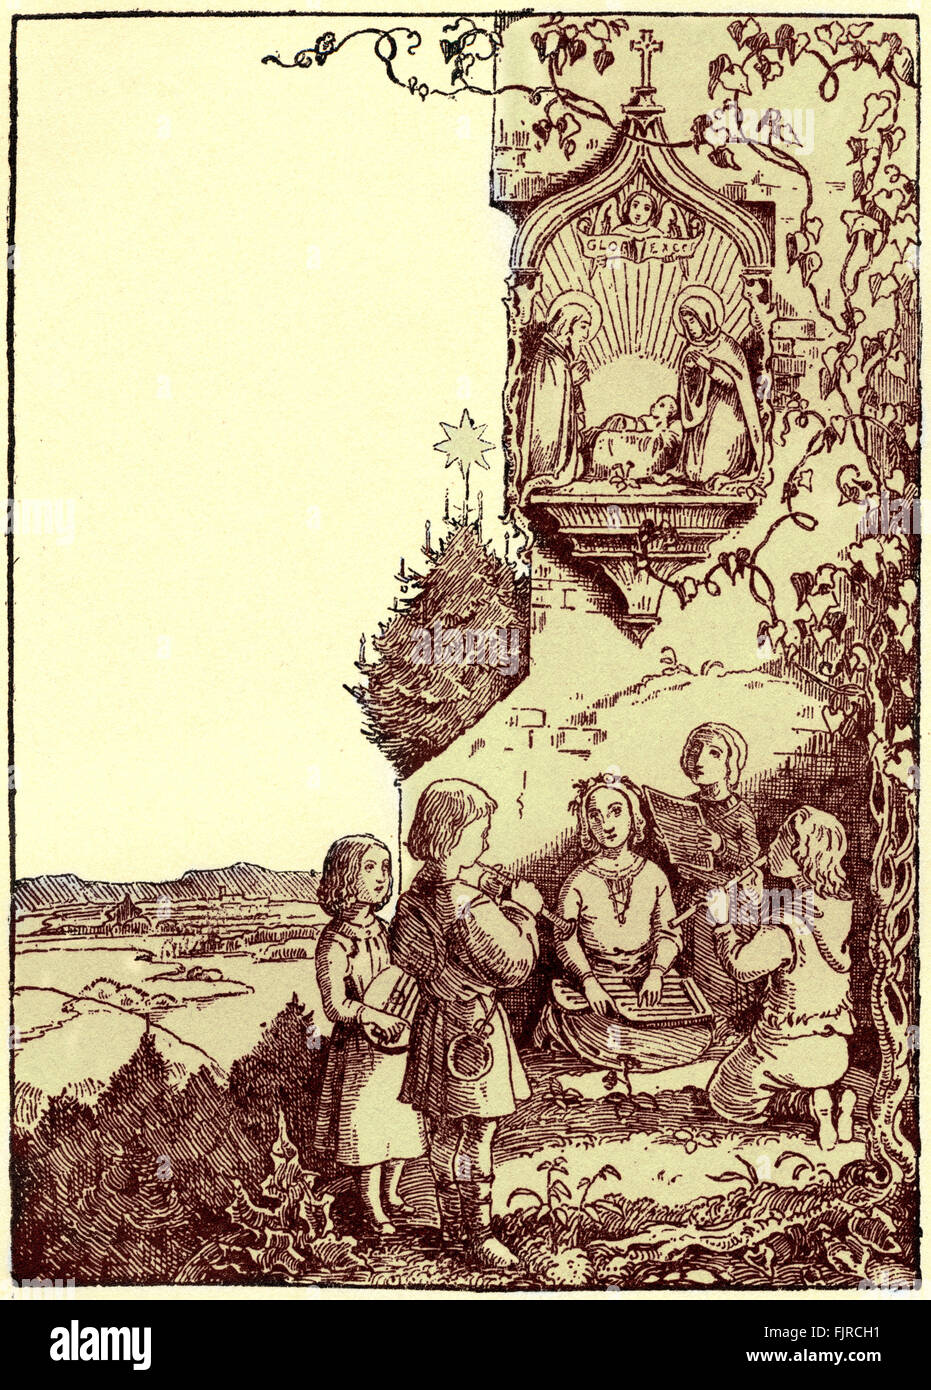 Christmas / Xmas illustration with Biblical references: statues of  Mary and Joseph with Jesus in manger, with small children playing instruments in countryside scene.  Christmas tree in background. 19th century woodcut by Franz Pocci. Stock Photo